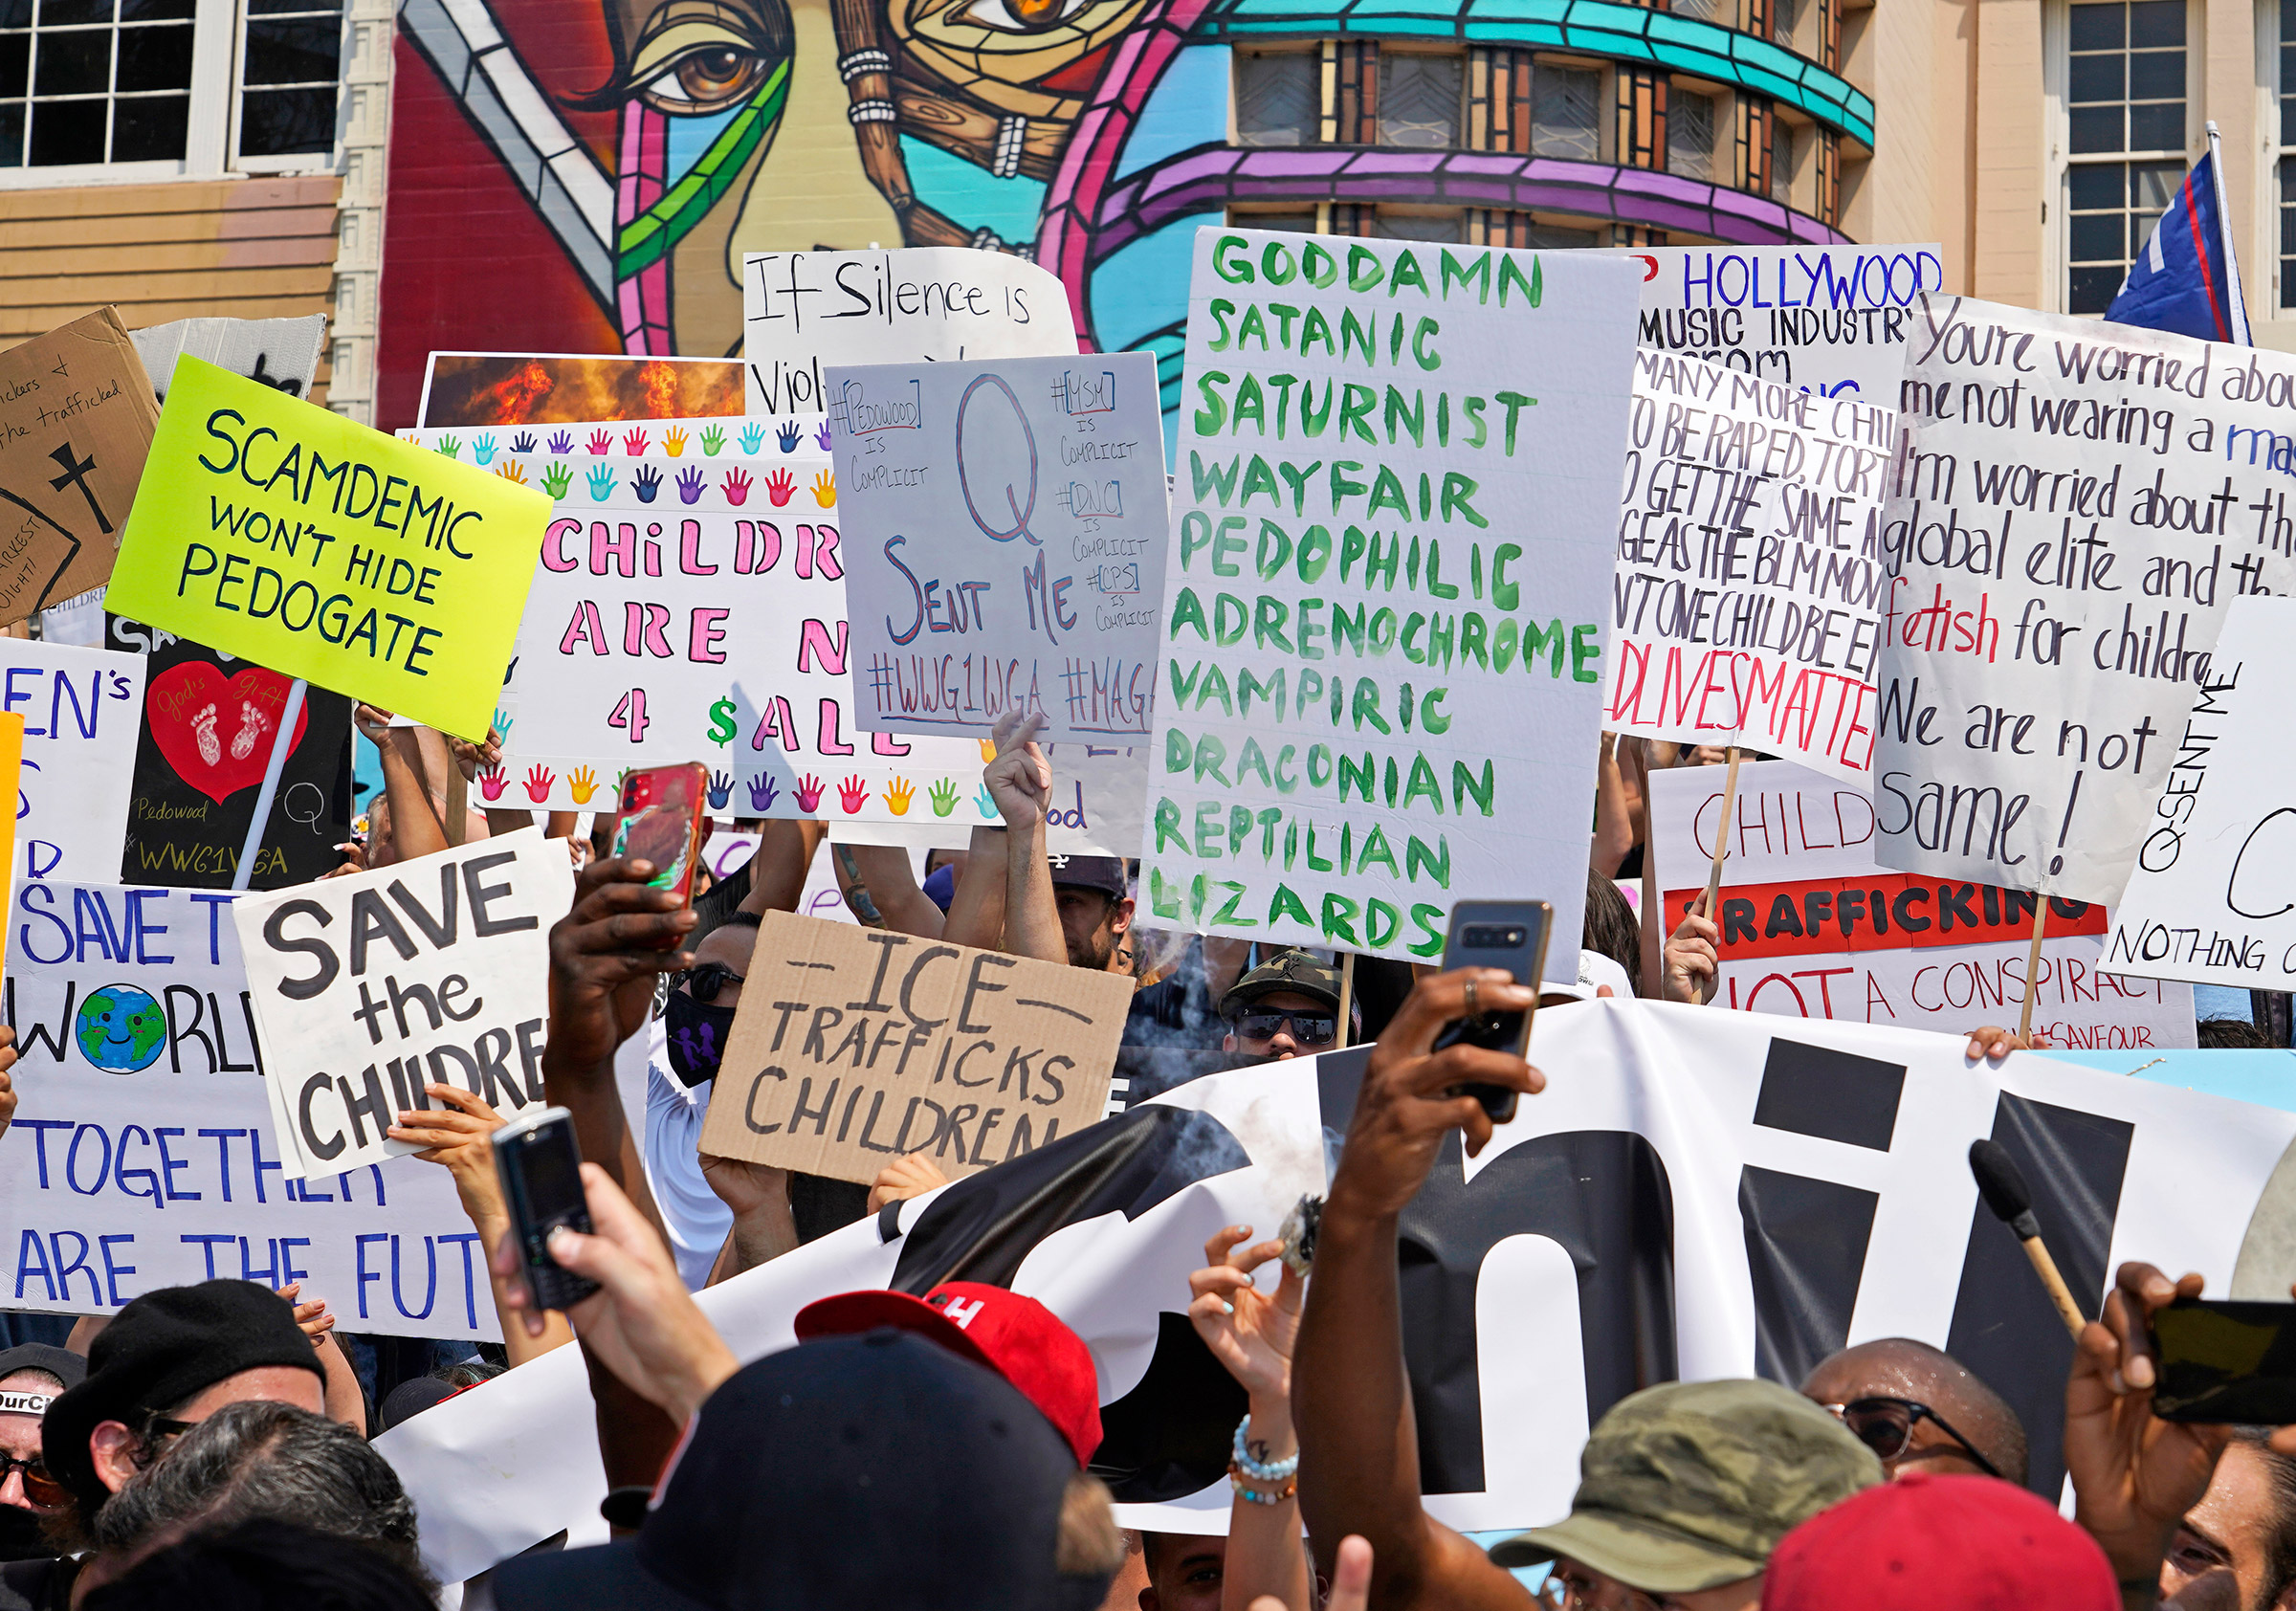 Signs showing various conspiracy theories at a Save Our Children rally in Los Angeles, Aug. 22, 2020. (Jamie Lee Curtis Taete)